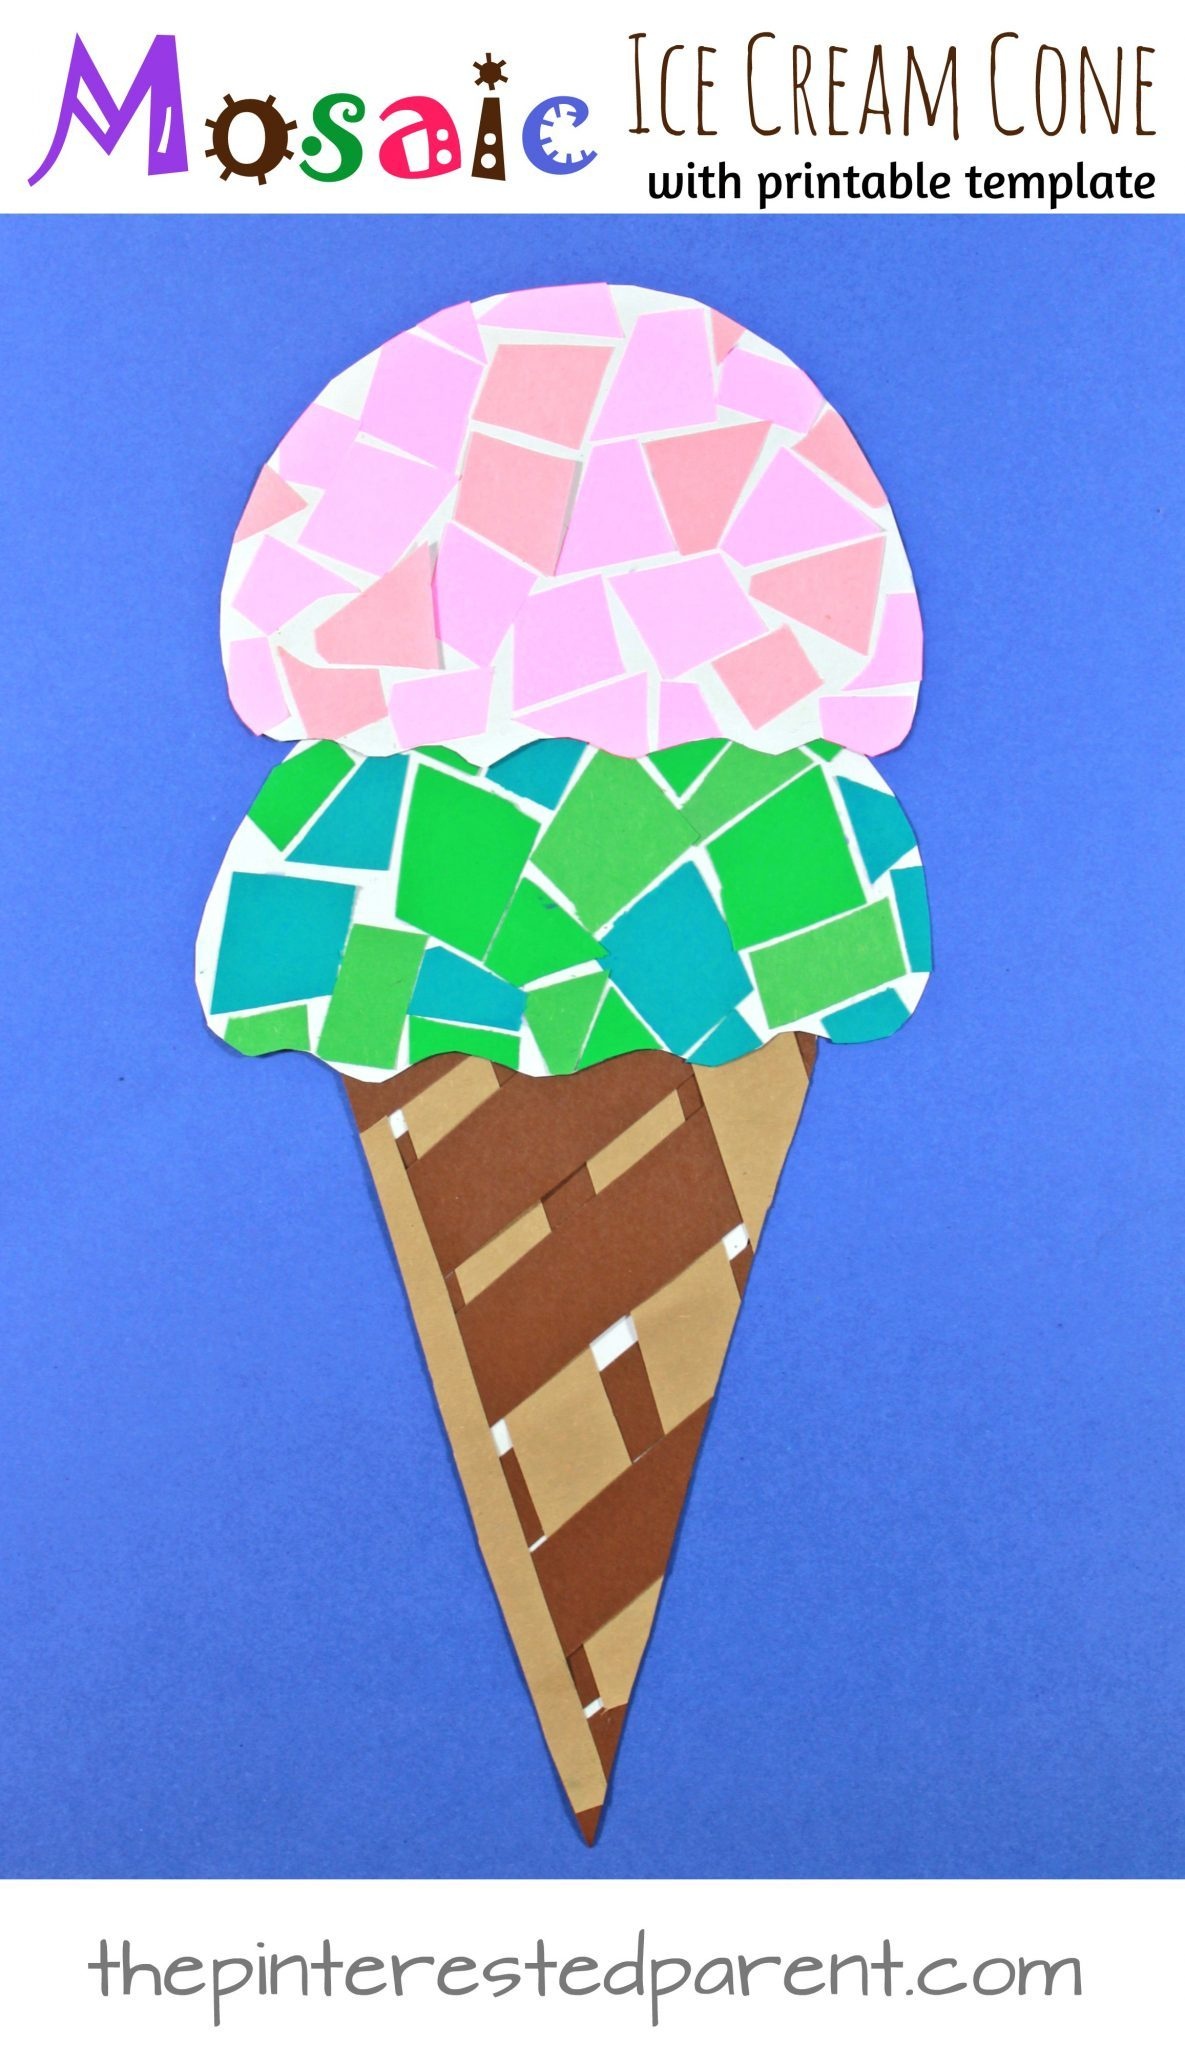 Printable Paper Mosaic Ice Cream Cone – The Pinterested Parent - Ice Cream Cone Template Free Printable